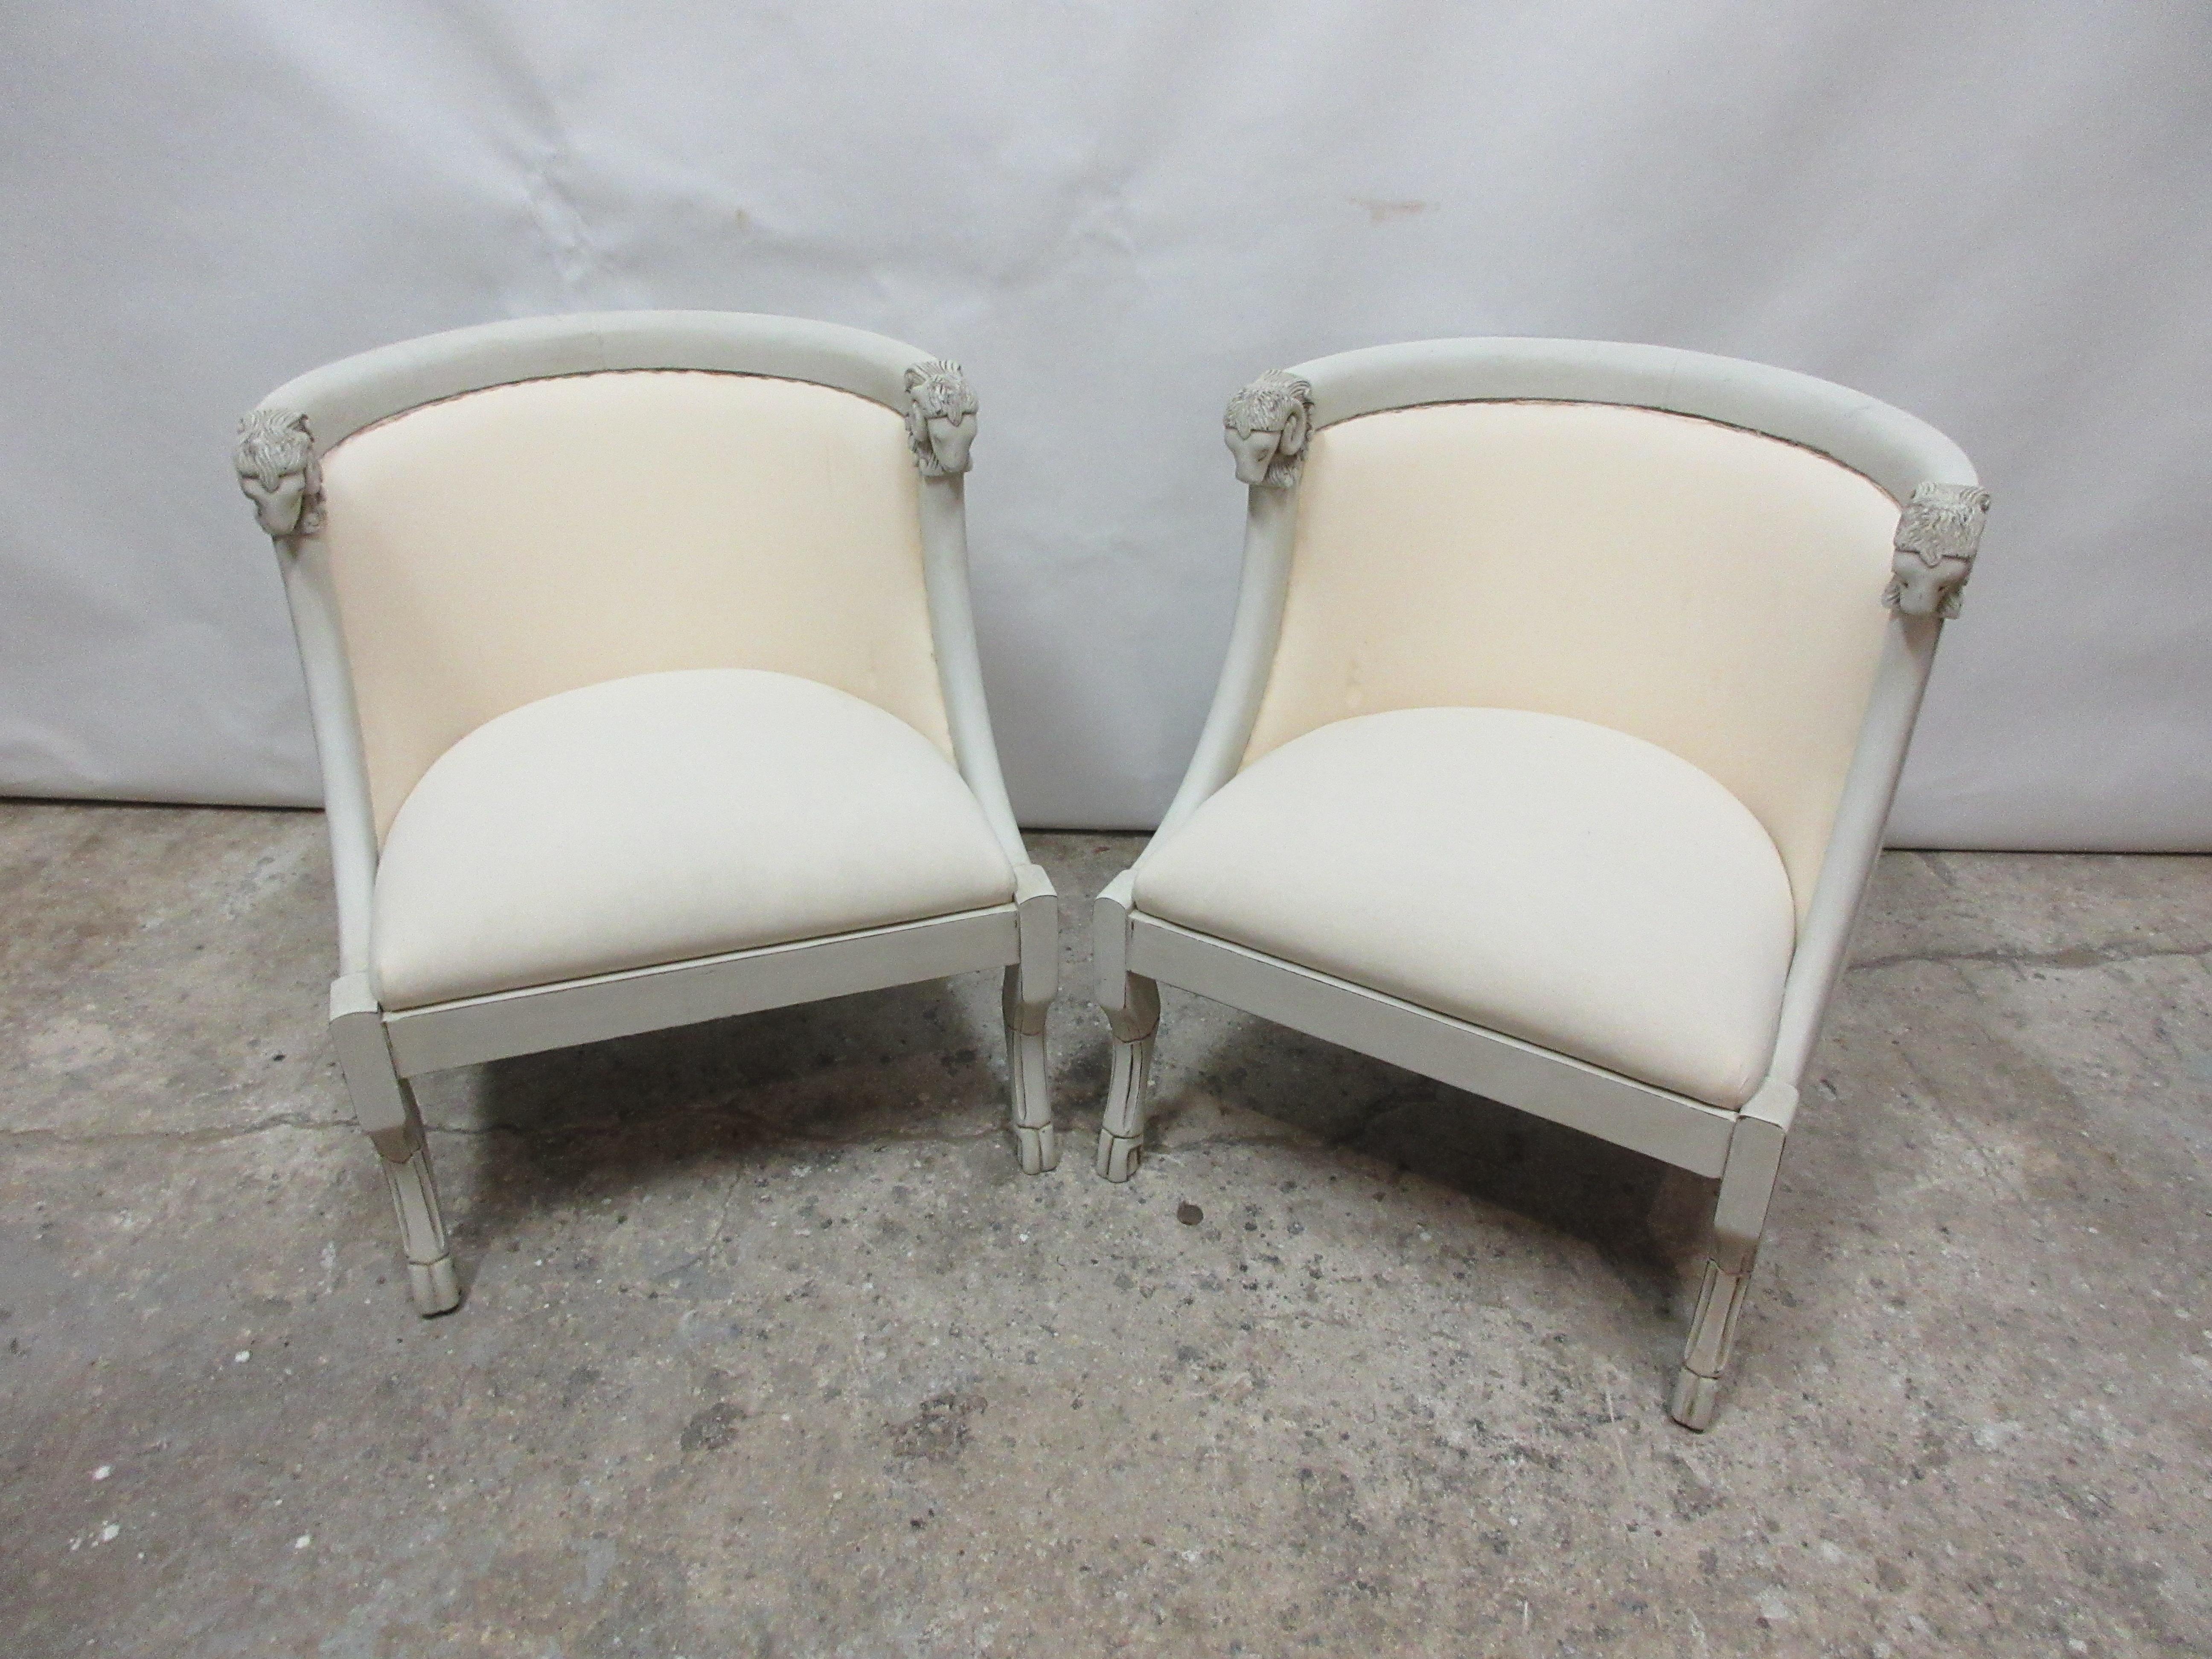 This is a set of 2 Rams Head Berger chair, they have been restored and repainted with milk paints 